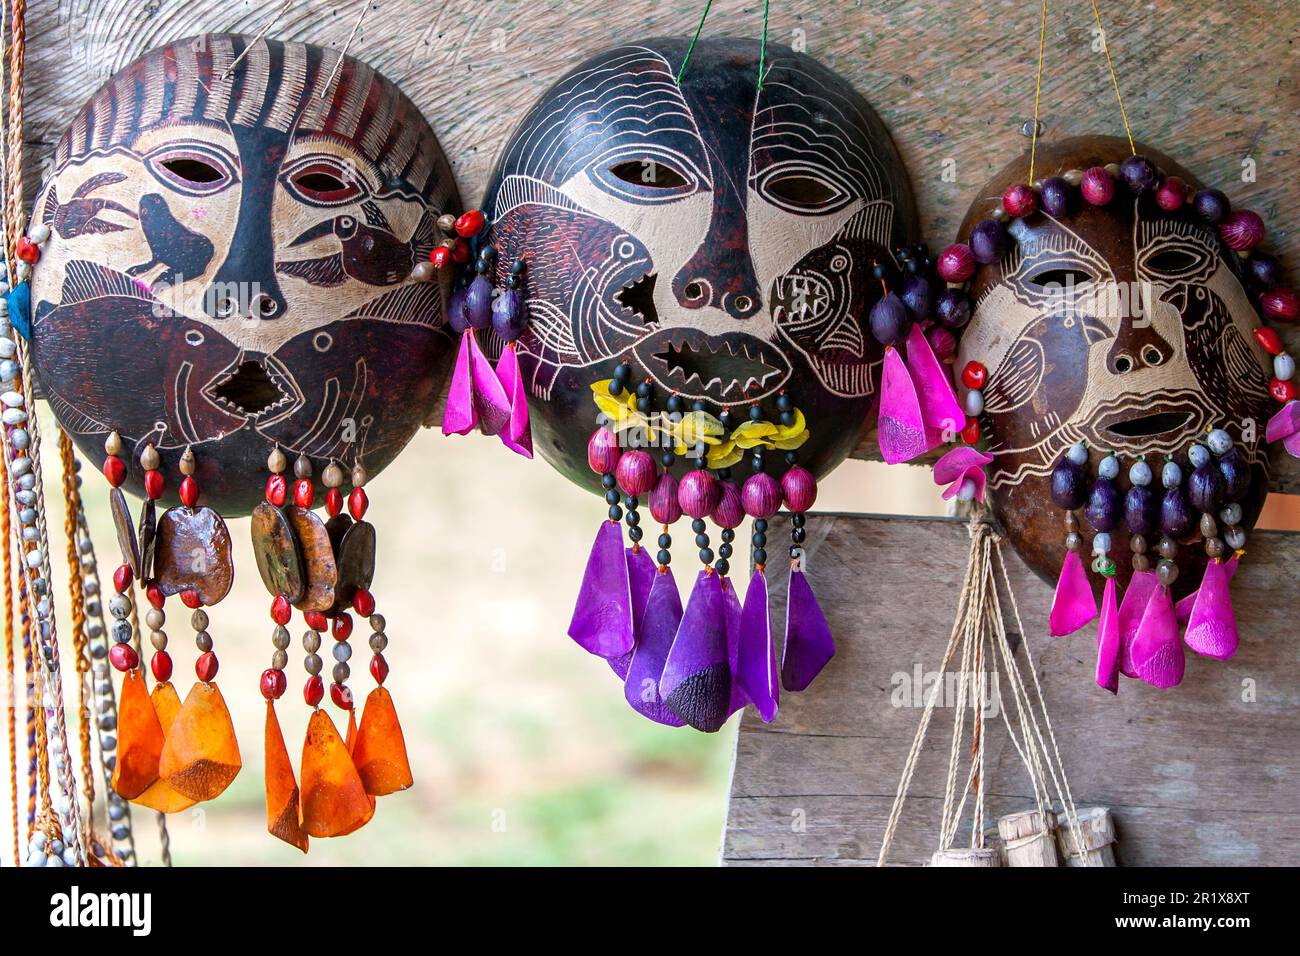 Indian traditional face masks for sale at the Yagua village on the banks of the Amazon River near Iquitos in Peru. Stock Photo